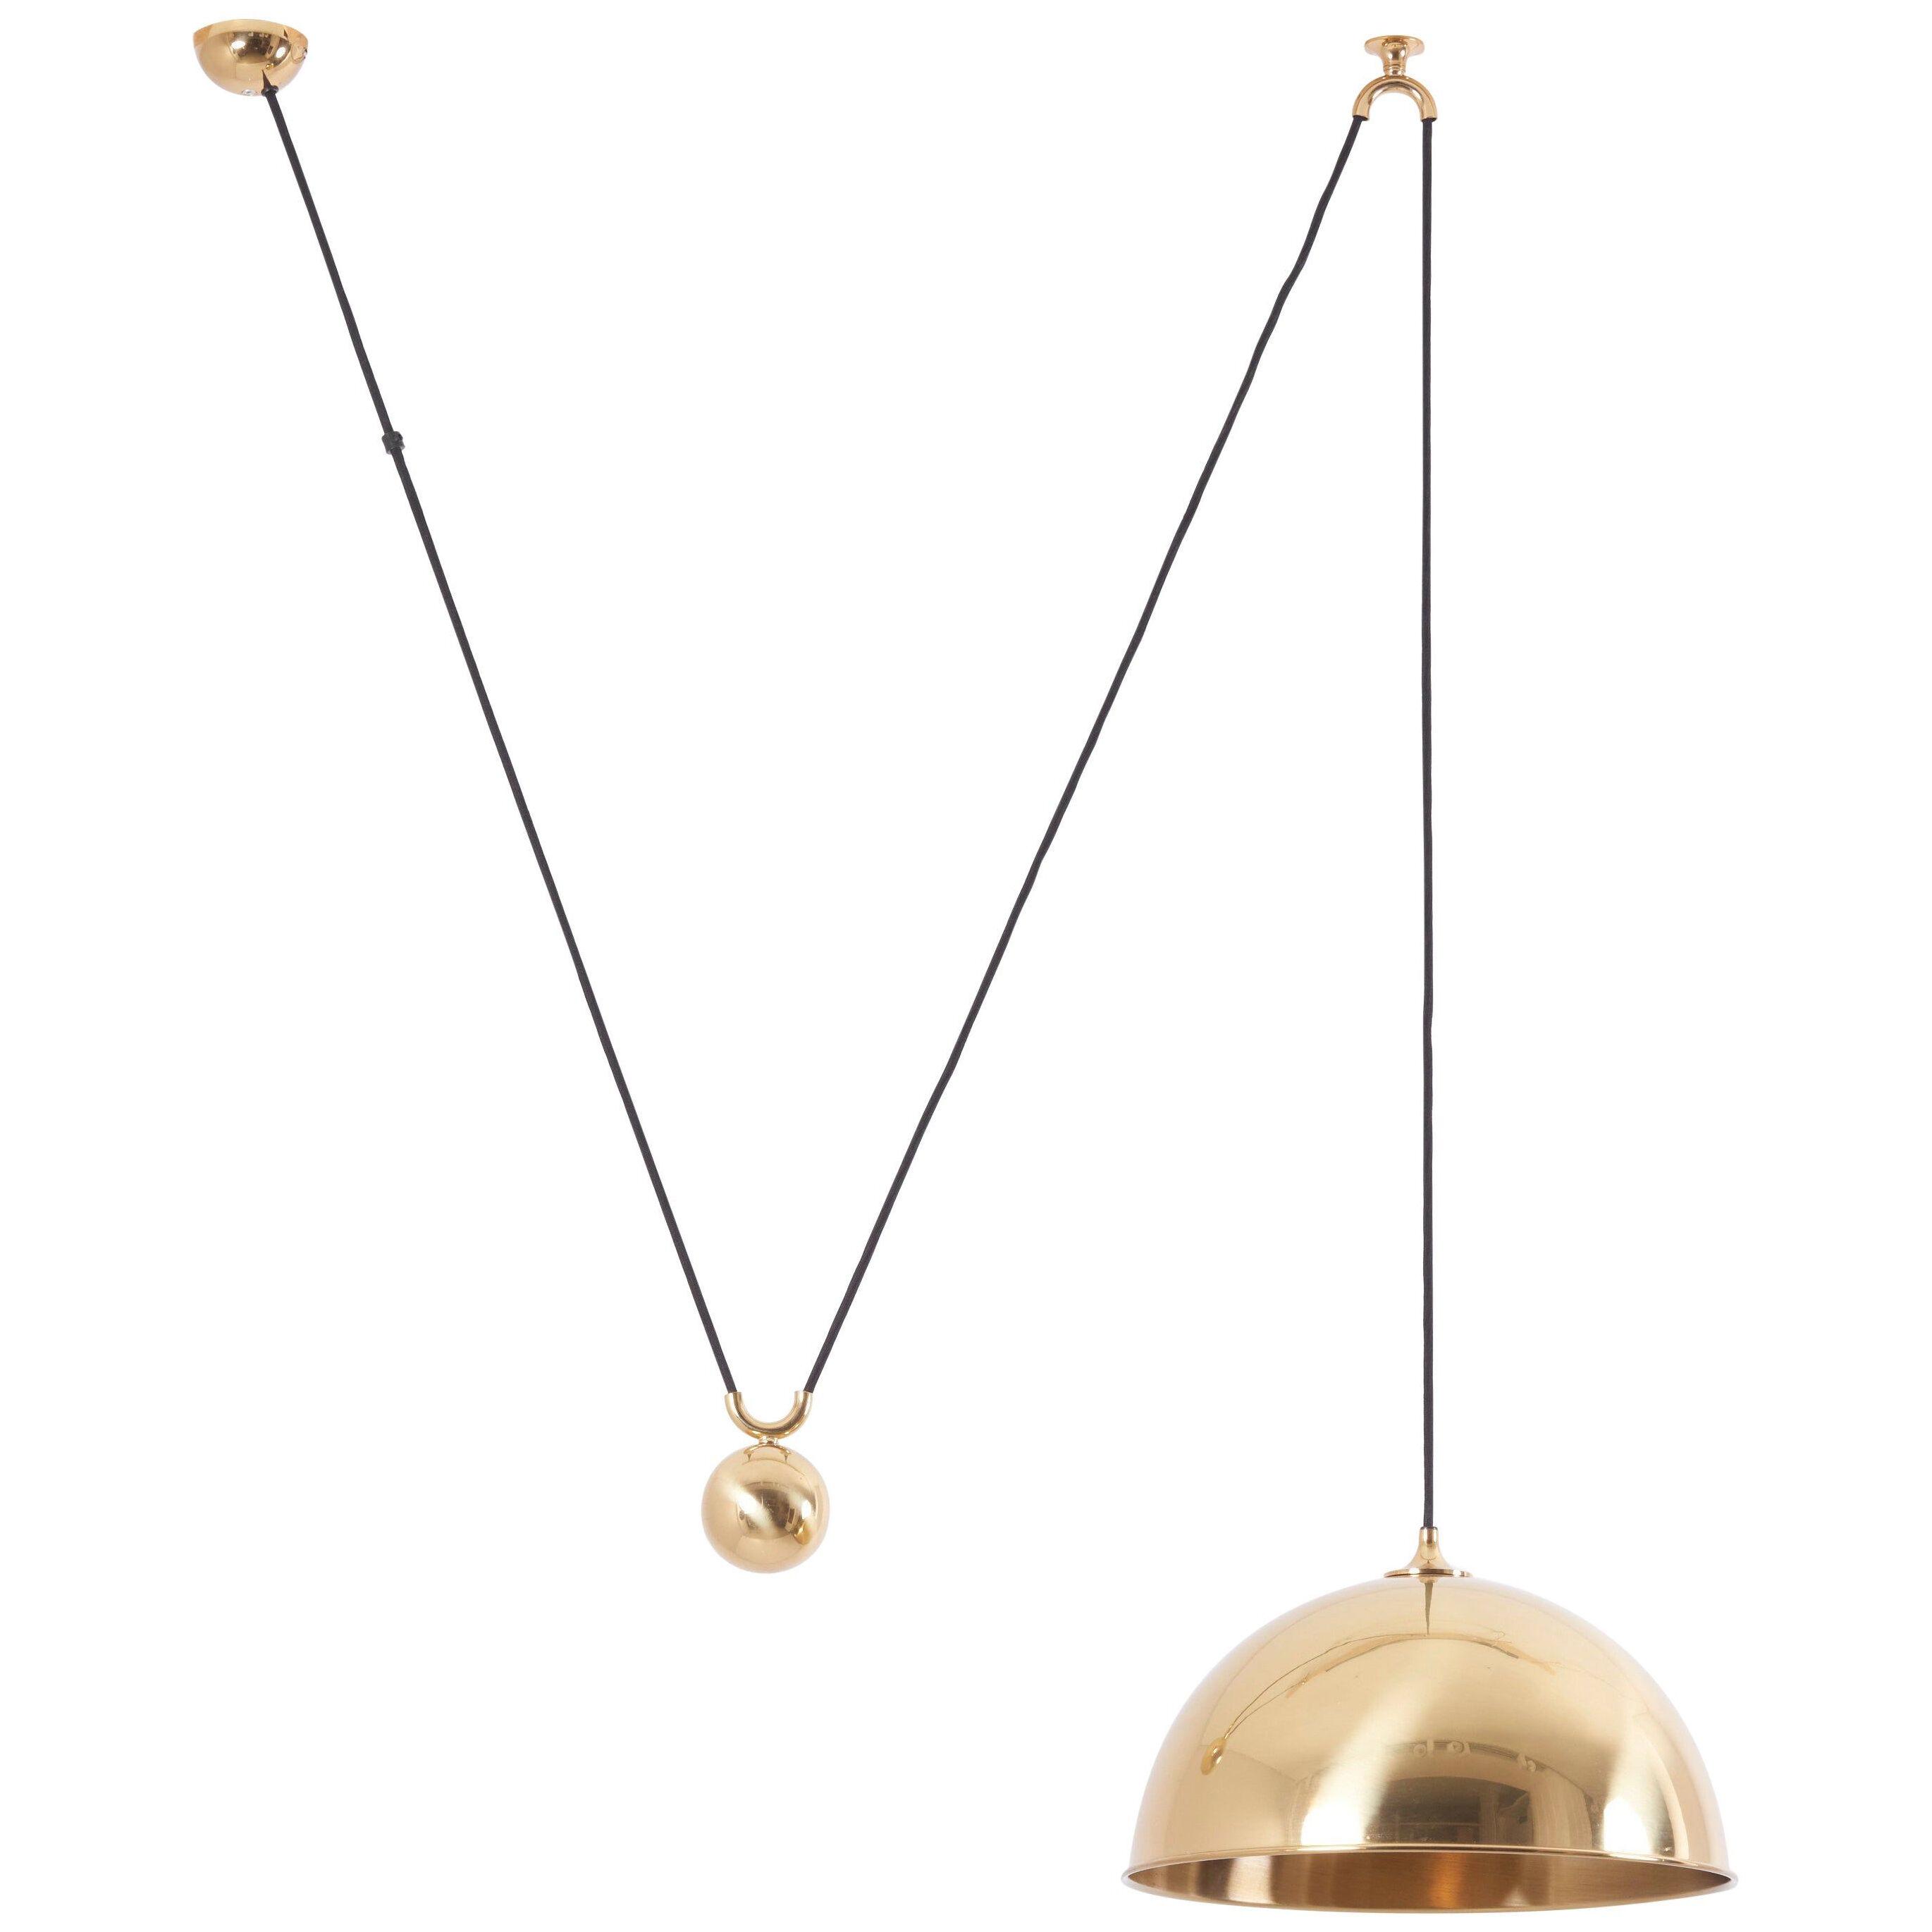 Pendant Lamp Posa with Side Pull in Brass by Florian Schulz, Germany, 1970s